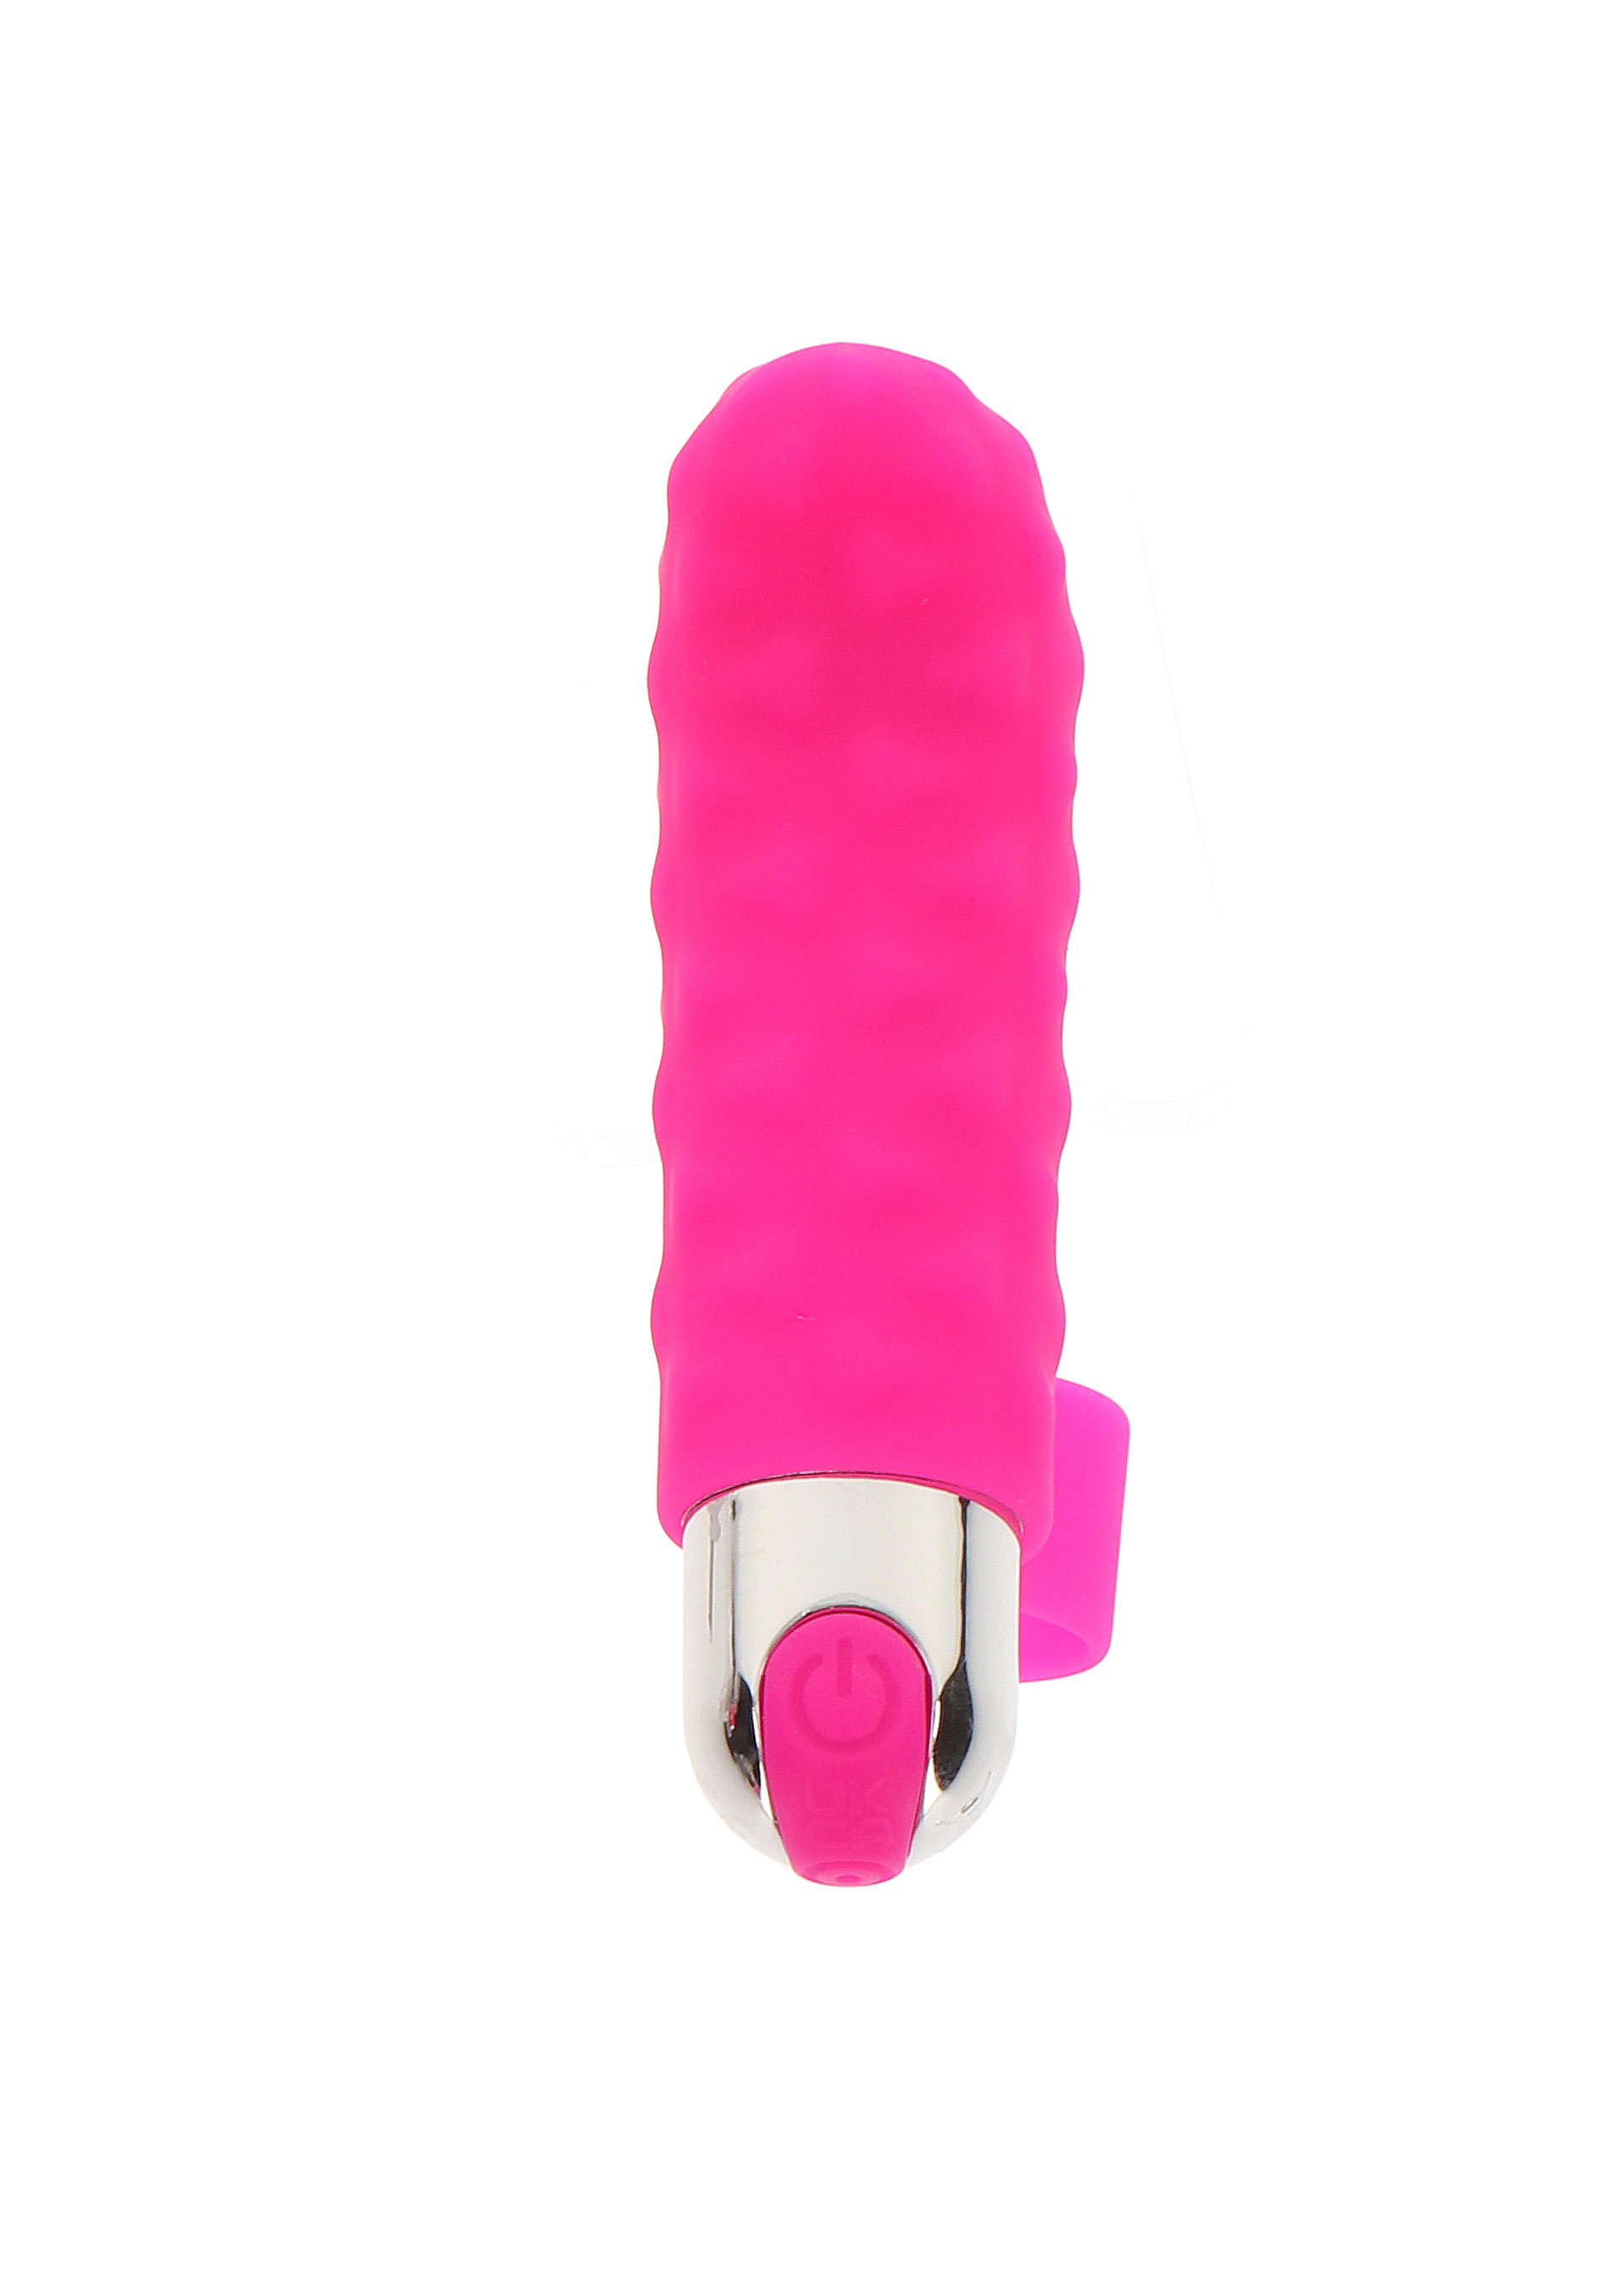 ToyJoy Fingervibes - Tickle Pleaser Rechargeable